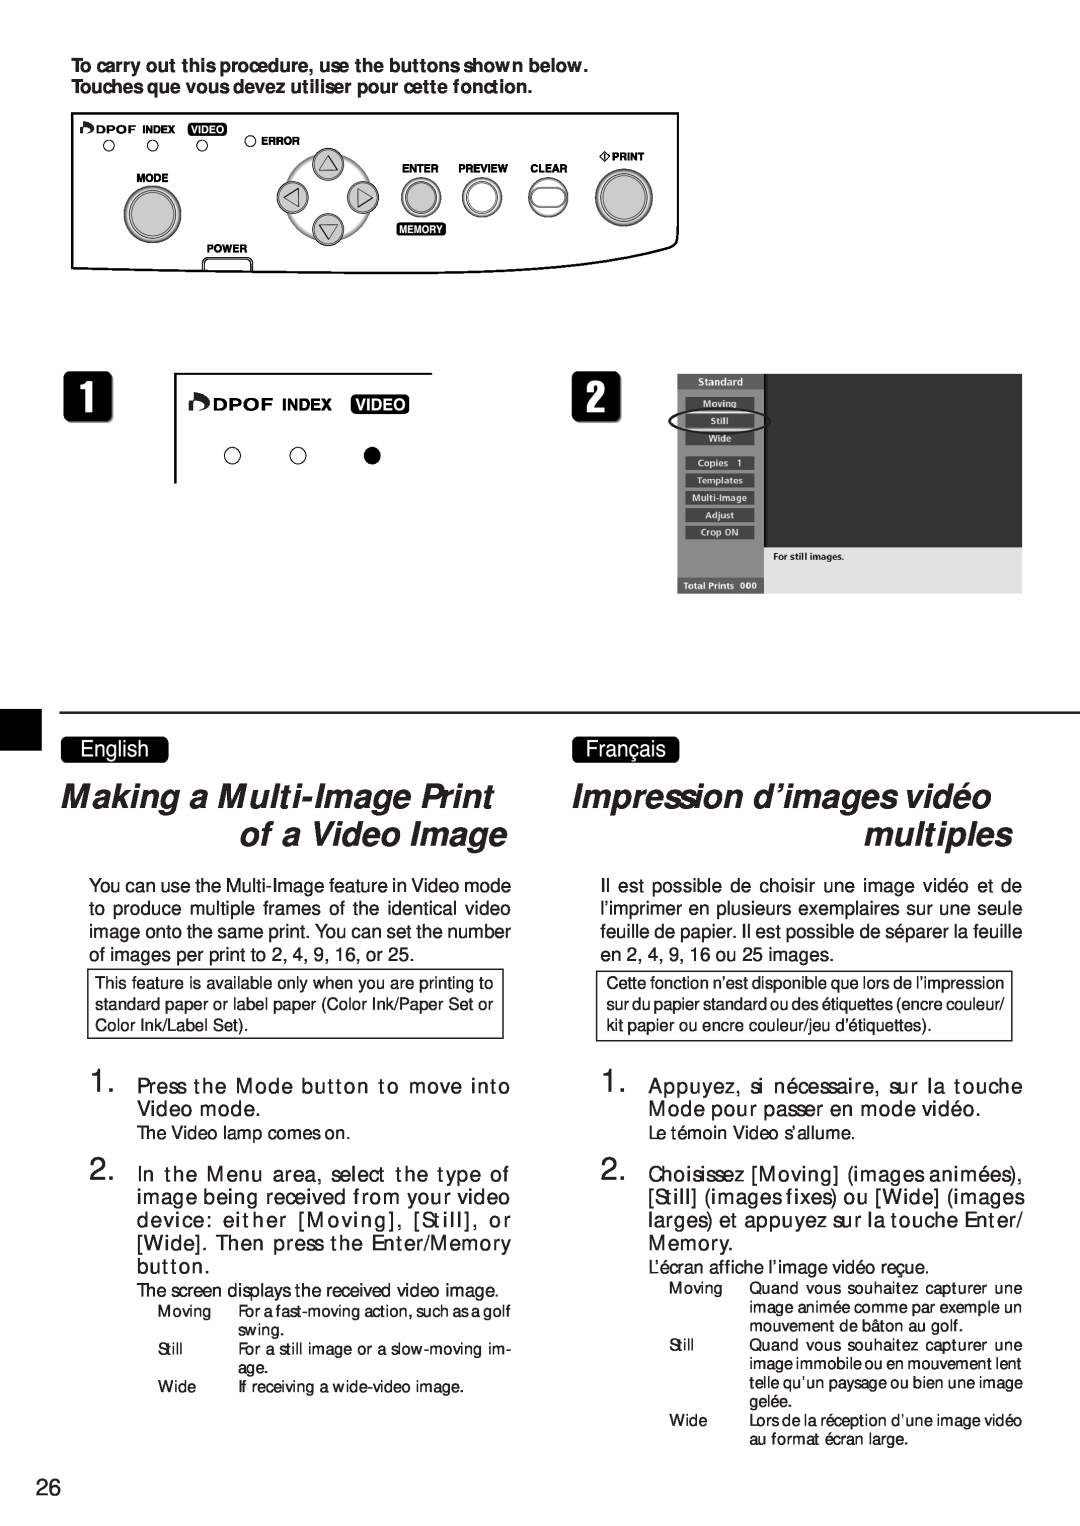 Canon CD-300 manual Making a Multi-Image Print of a Video Image, Impression d’images vidéo multiples 